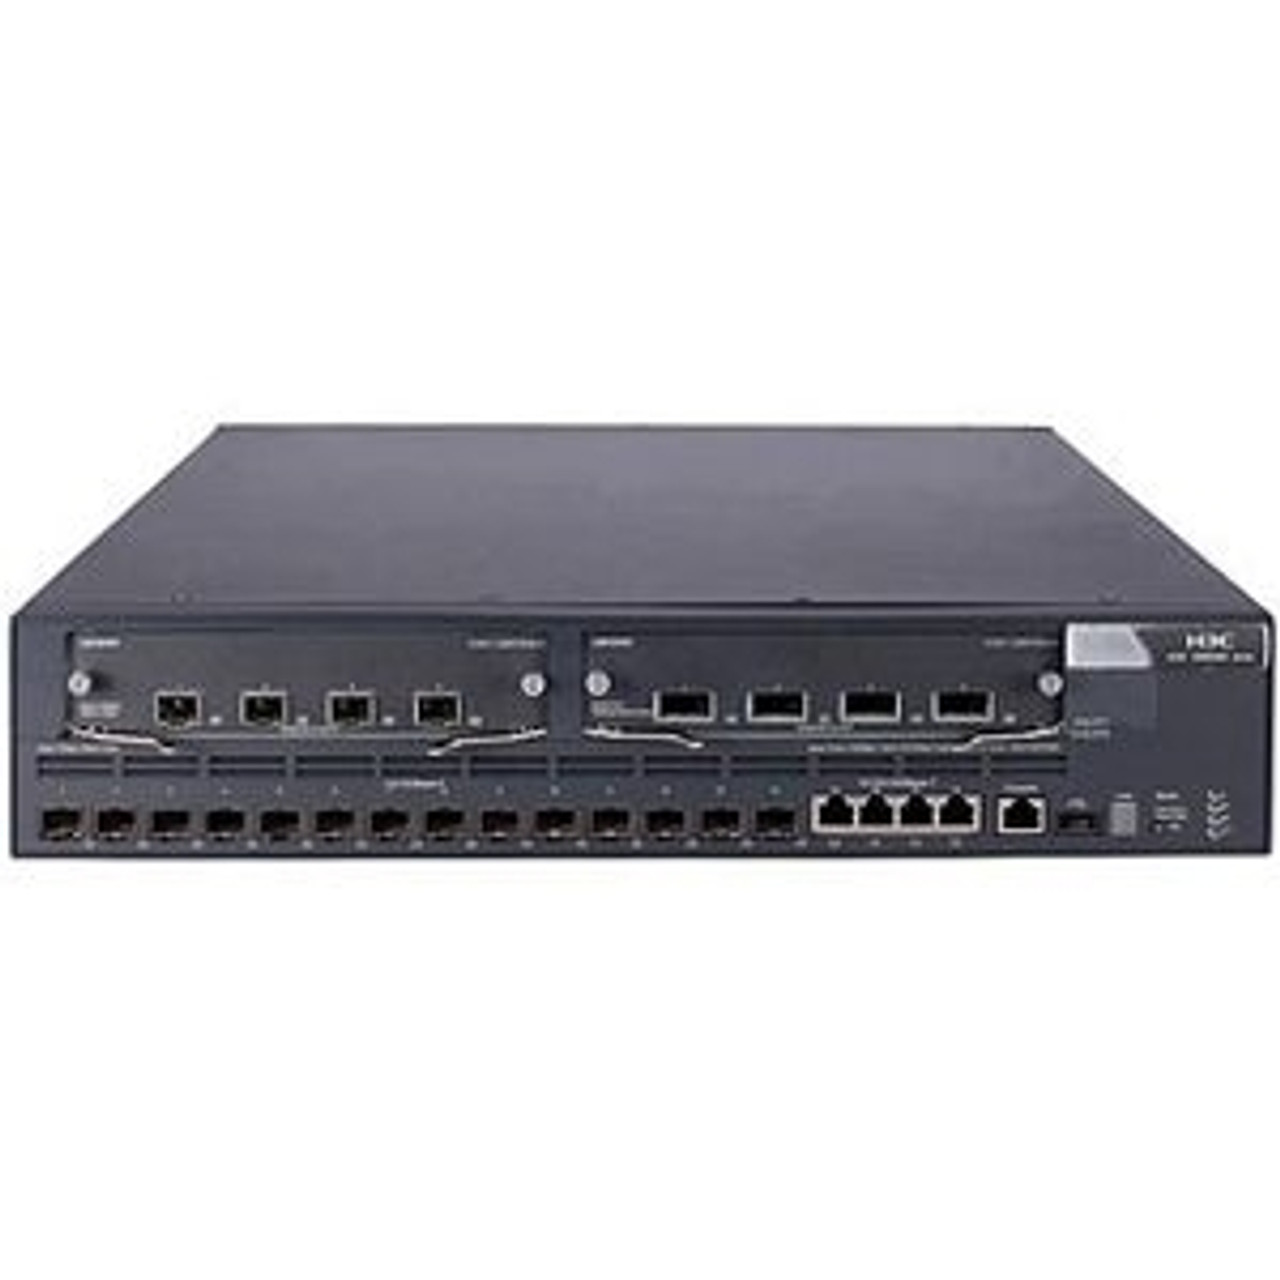 JC106AC HP 5820-14XG-SFP+ 14-Ports 10Gigabit SFP+ 4-Ports 10/100/1000Mbps RJ-45 Manageable Layer3 Rack-mountable 2U Switch with 2x Extended Module Slots and